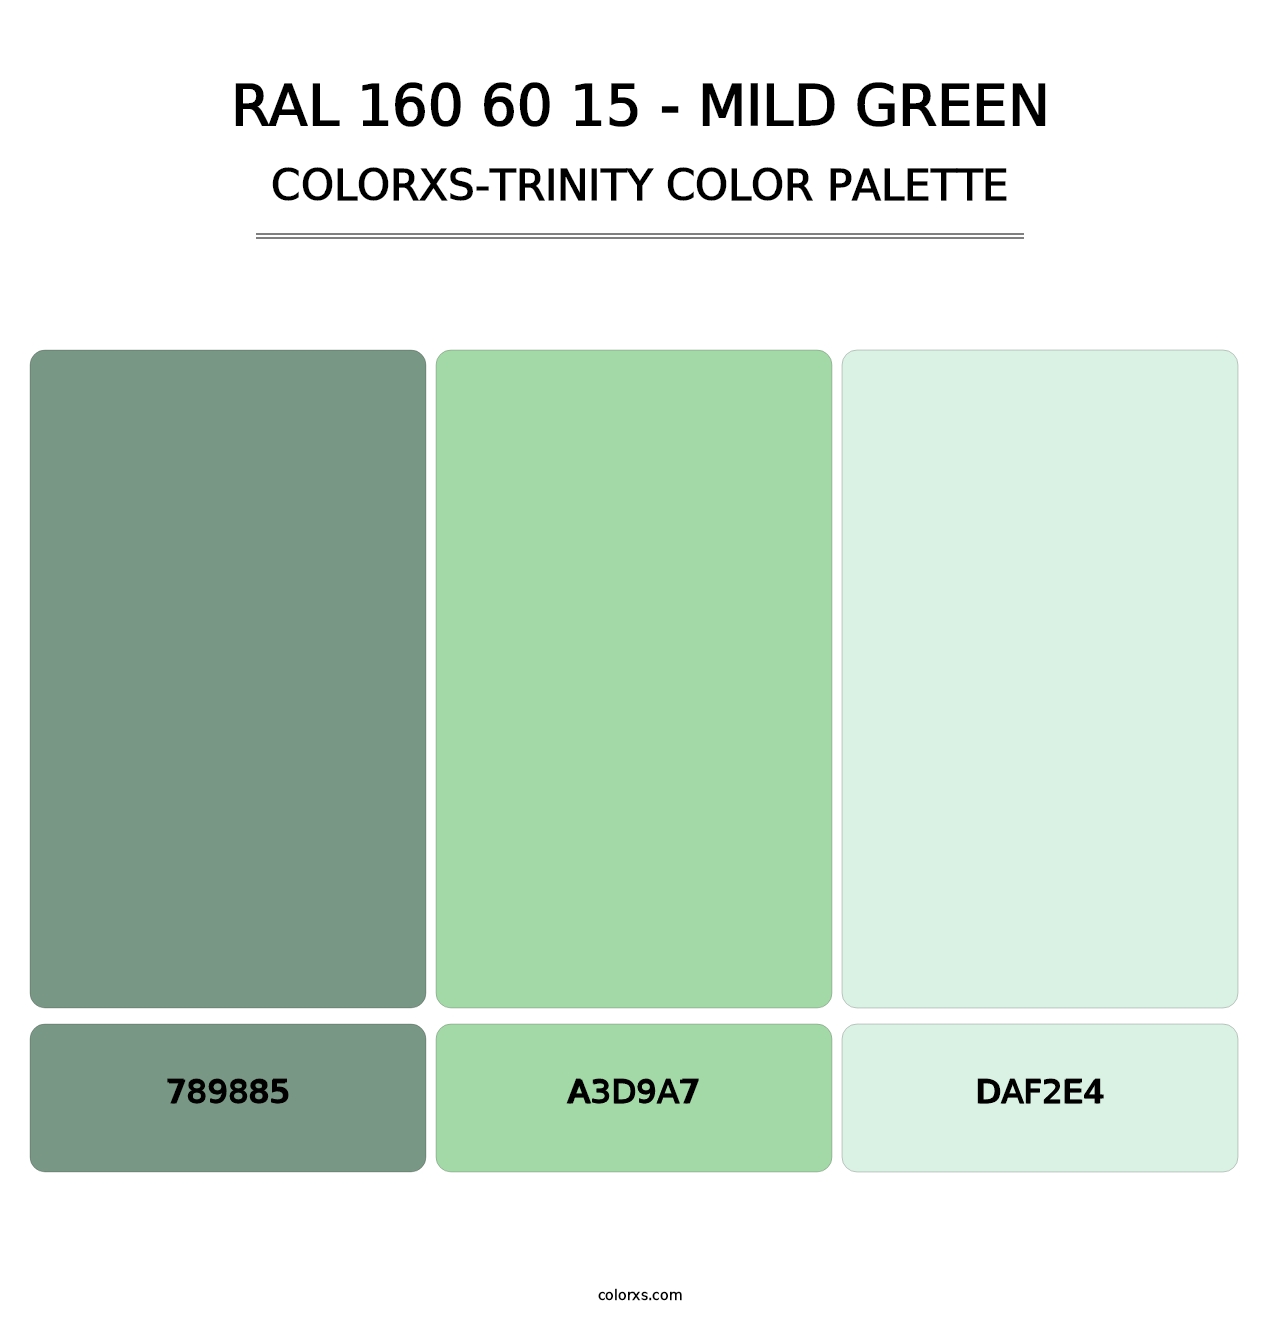 RAL 160 60 15 - Mild Green - Colorxs Trinity Palette